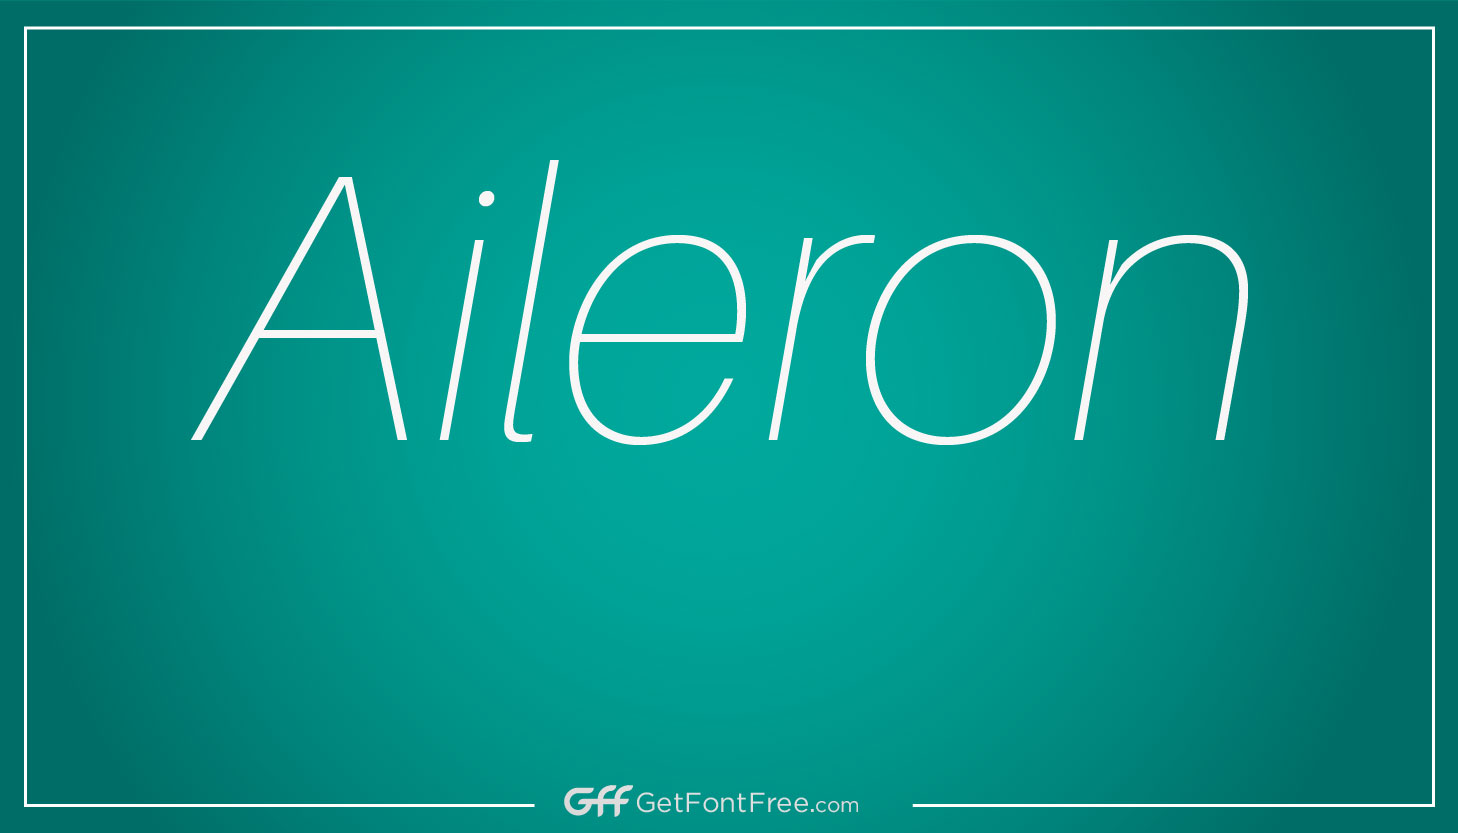 Aileron Font is a sans-serif font family designed by Sora Sagano, a designer and art director based in Japan. It was first released in 2014 and has since become a popular choice for designers around the world. Aileron's clean, modern design and simple geometric shapes make it a versatile font that can be used for a wide range of design projects. In this article, we will explore the history and background of the Aileron font, as well as its key features, use cases, and tips for effective use.